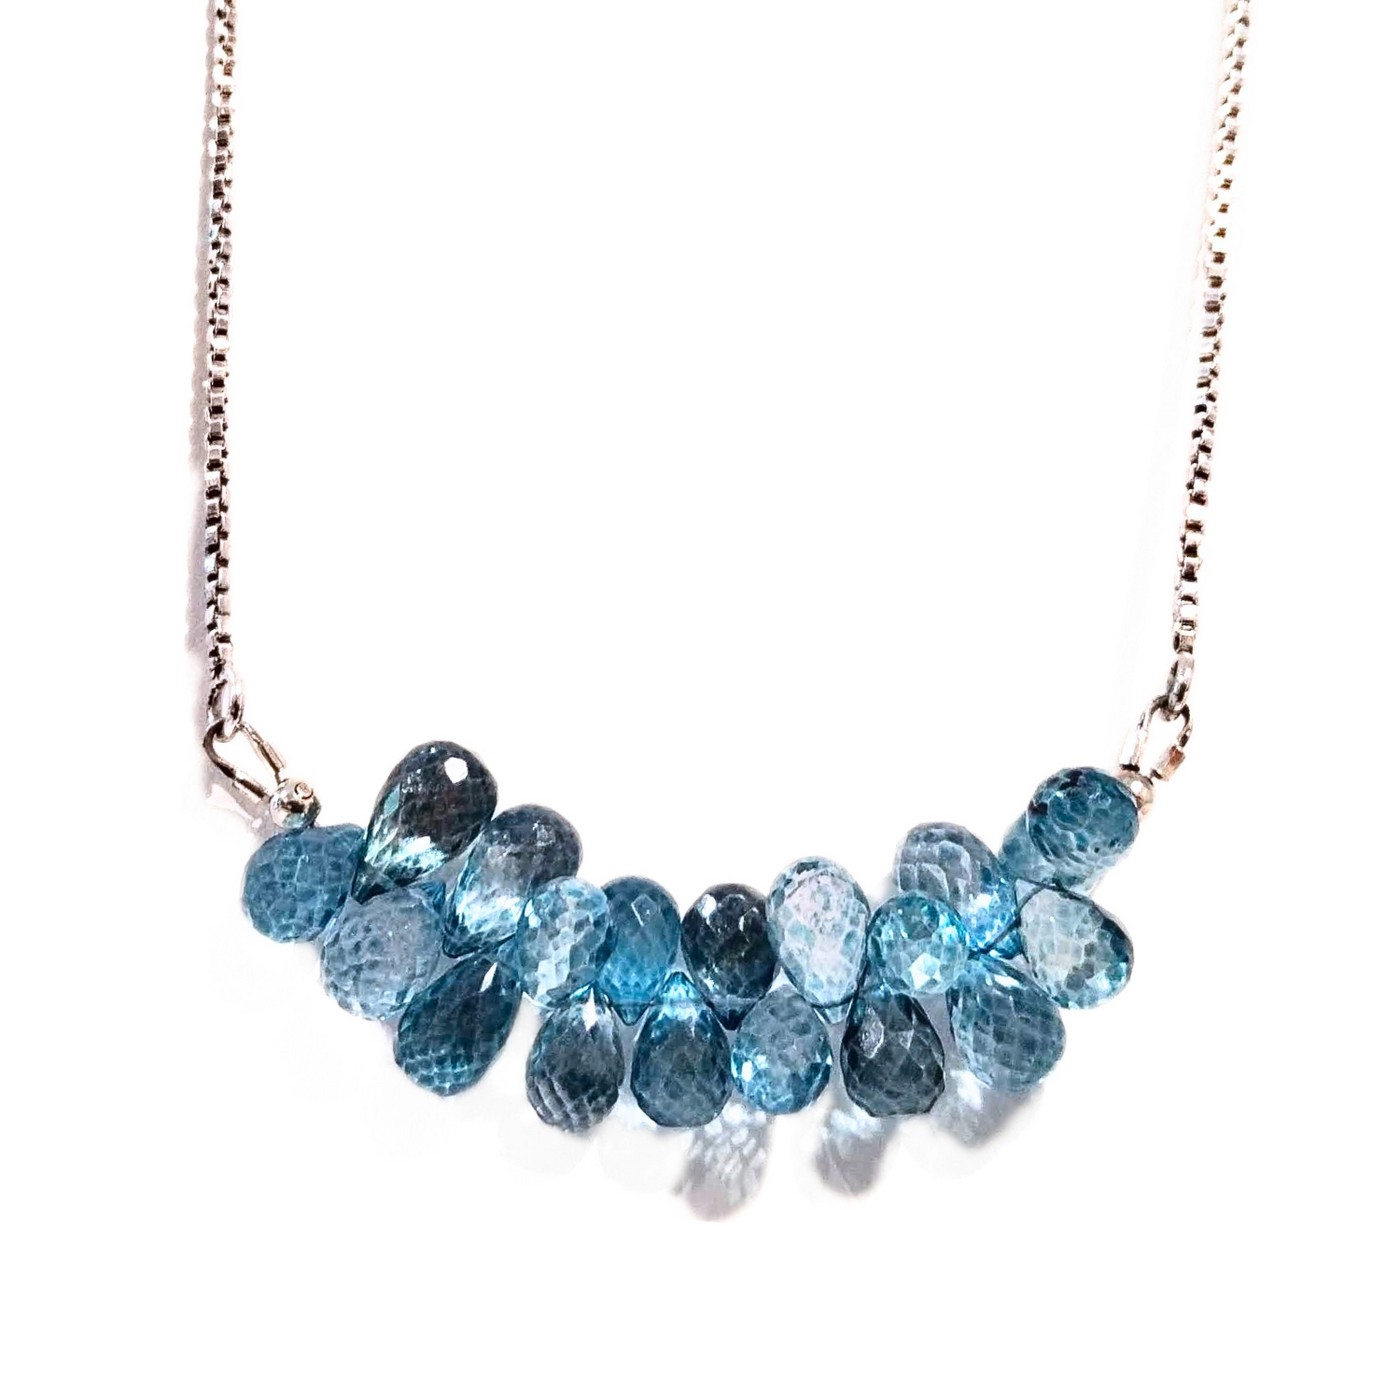 SM-321 London Blue Bead Necklace Sterling